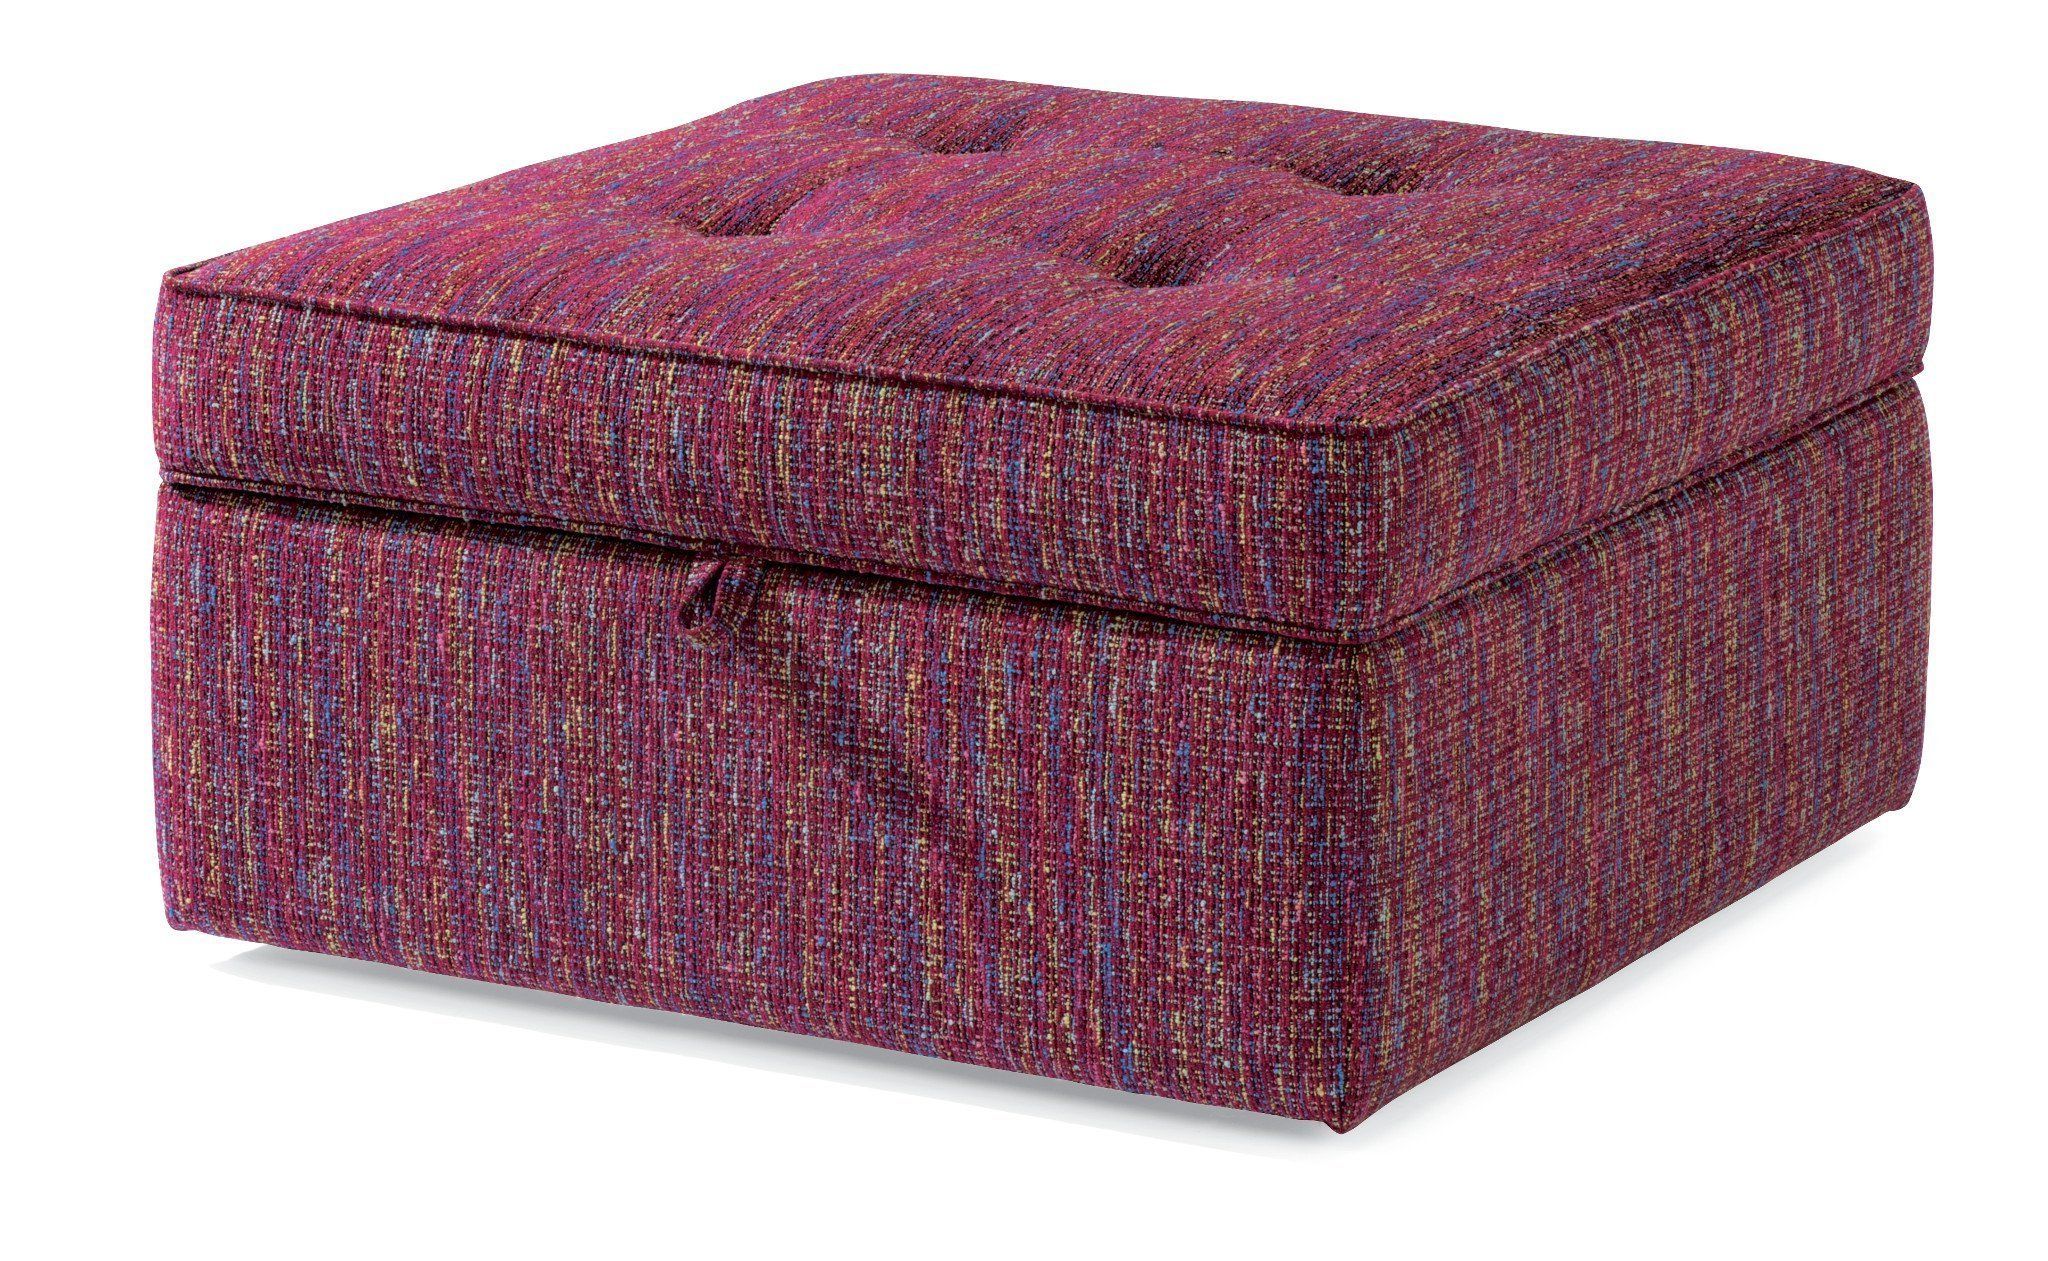 Natural Fabric Square Ottomans Pertaining To Fashionable Daphne Fabric Square Storage Ottoman – Adirondack Furniture (View 8 of 10)